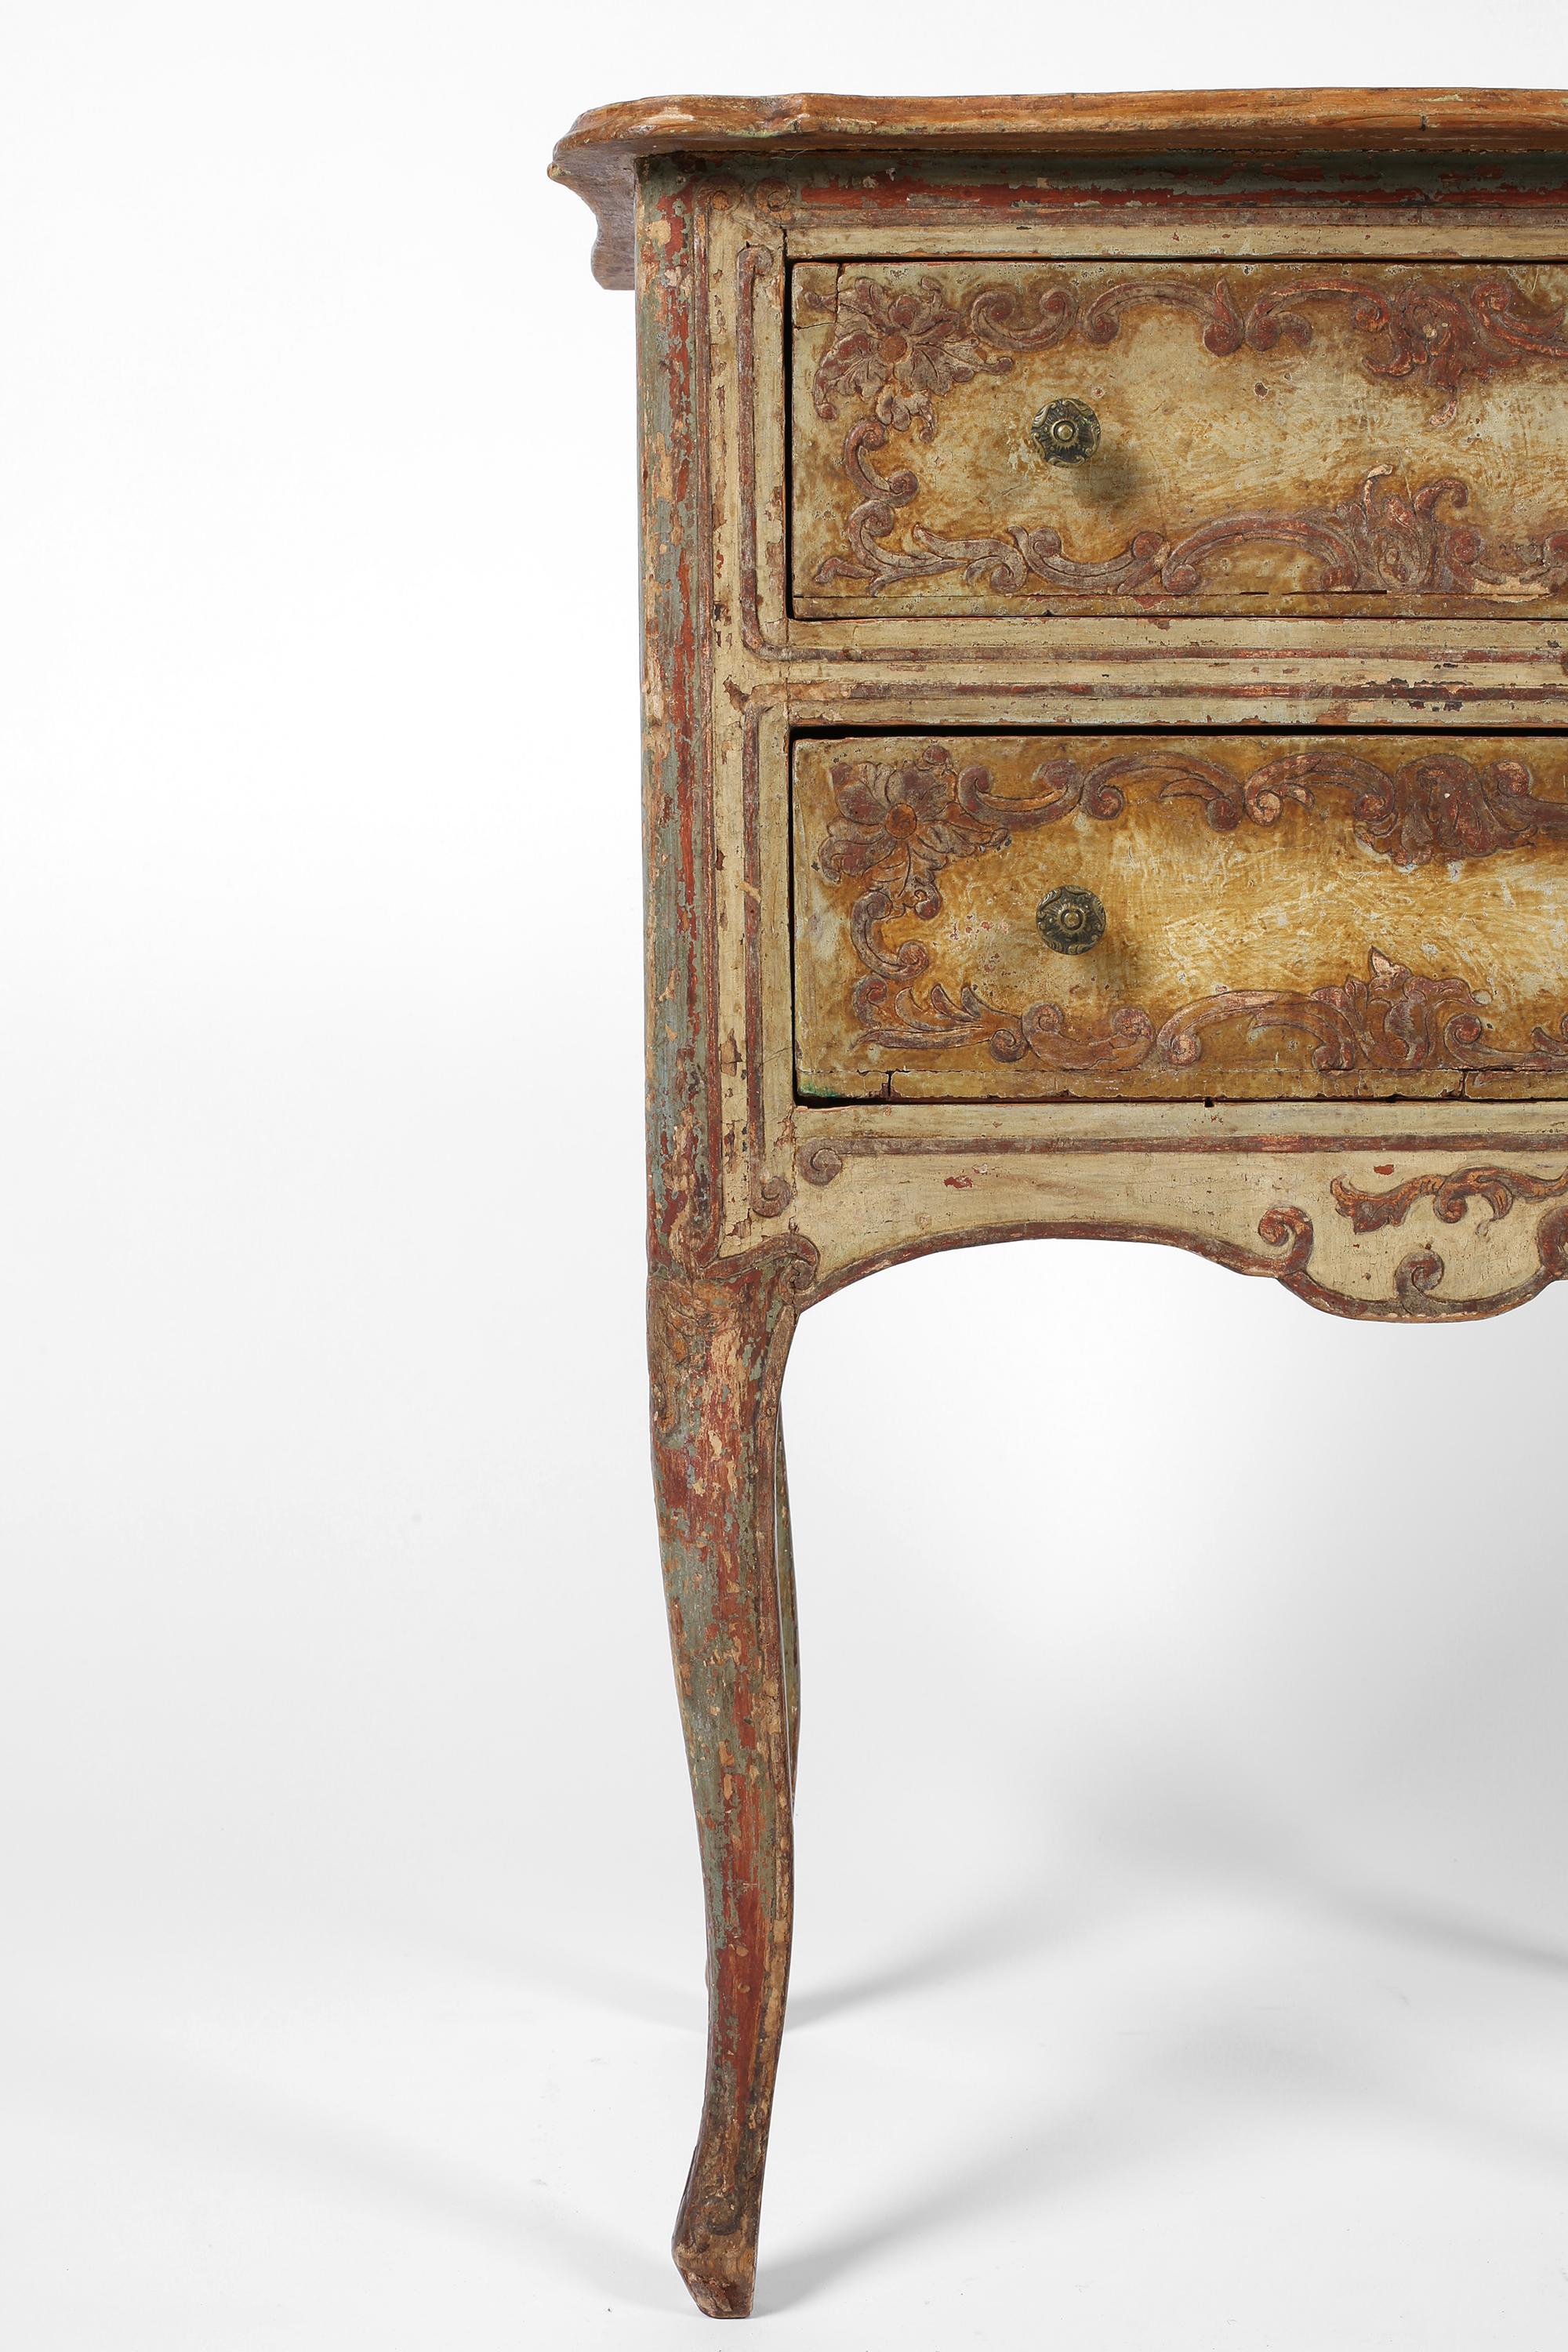 Early 19th Century Italian Florentine Painted Side Table Chest Bedside In Distressed Condition For Sale In London, GB